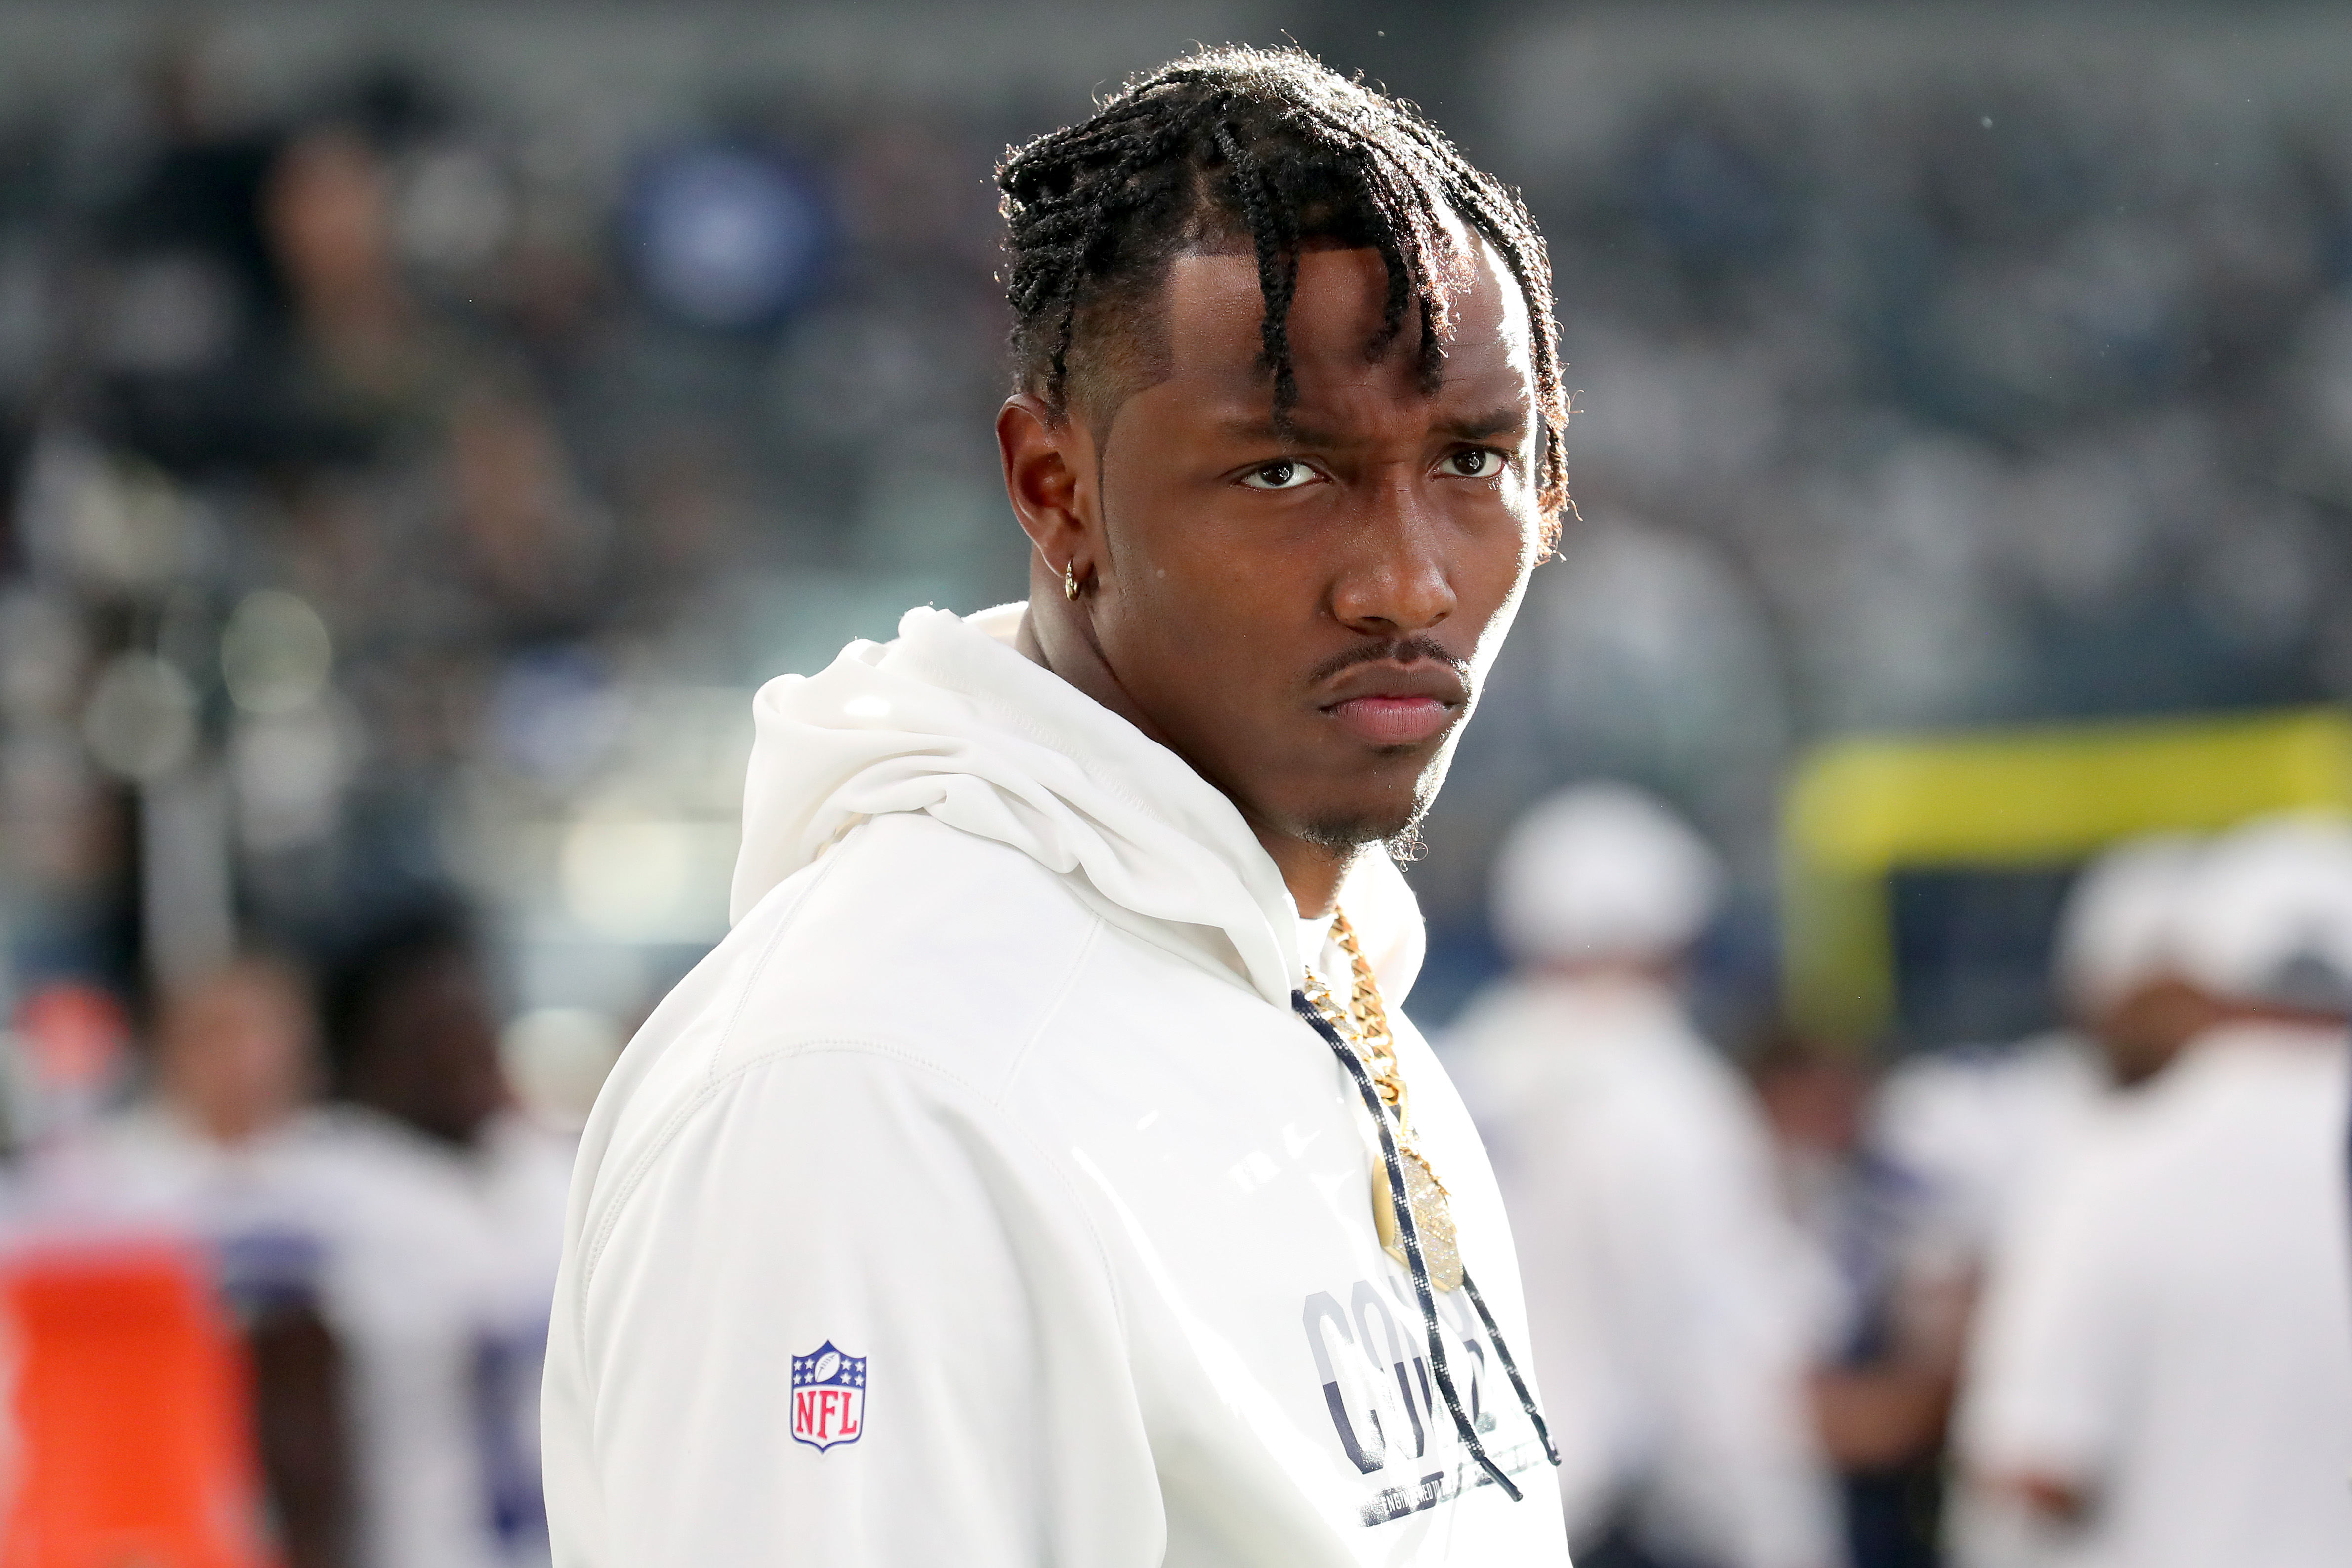 The Steelers signed former Cowboys first-round pick Taco Charlton